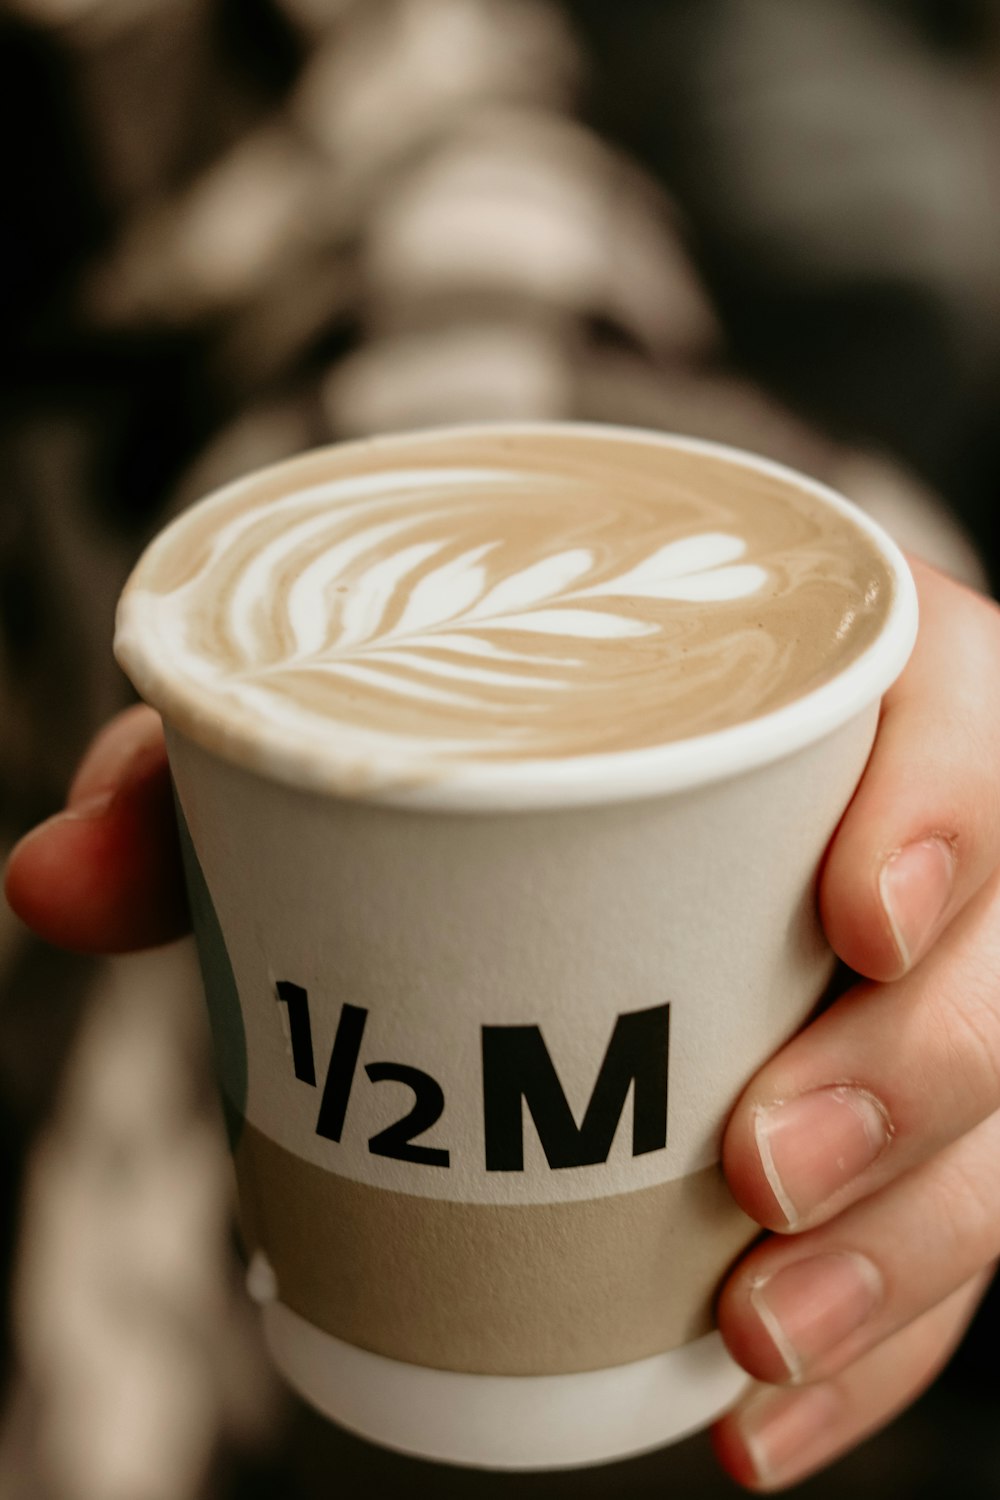 a person holding a cup of coffee with the number 12 on it